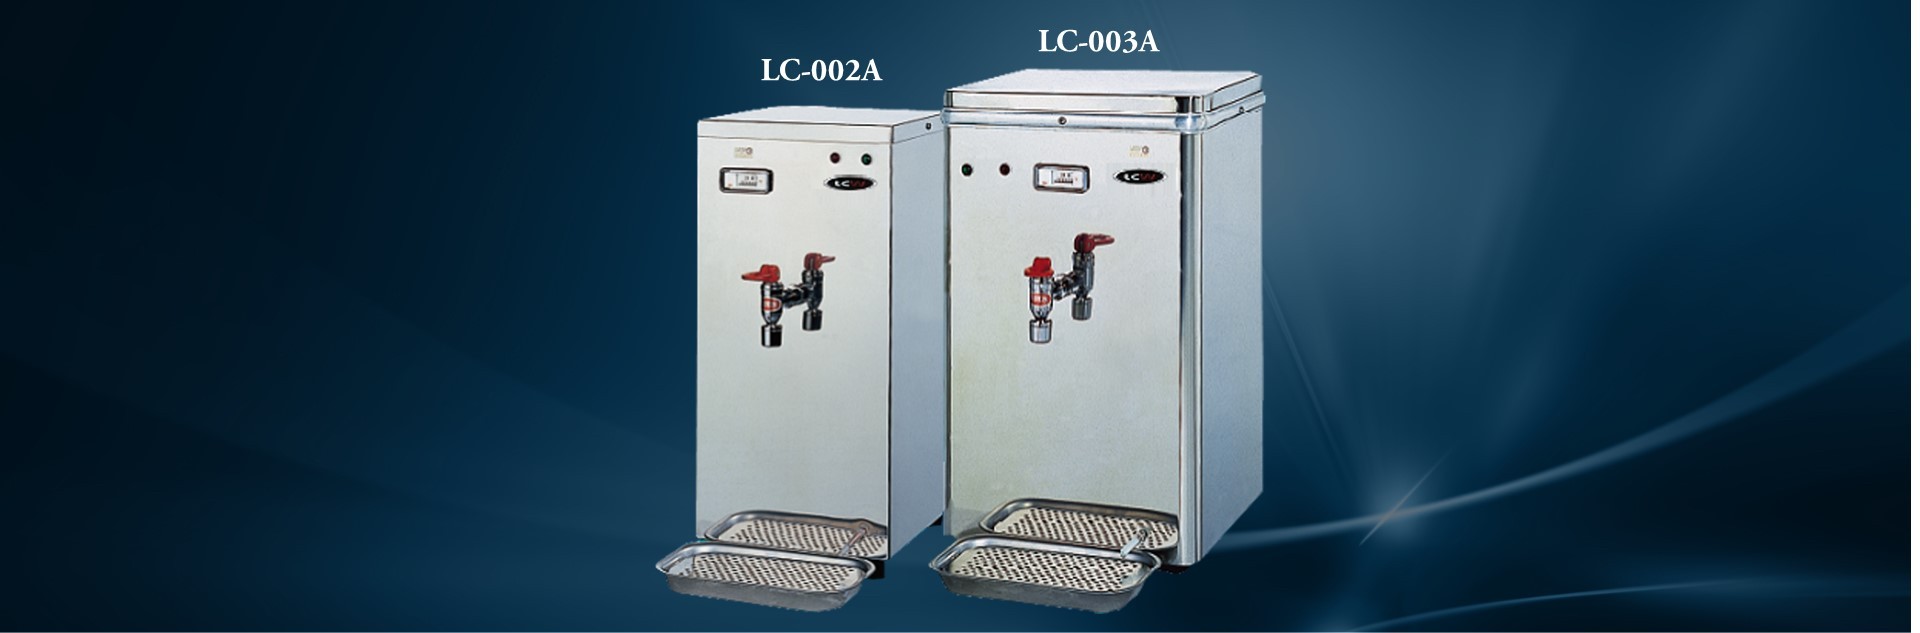 LC-002A/LC-003ACounter-Top Water Boiler